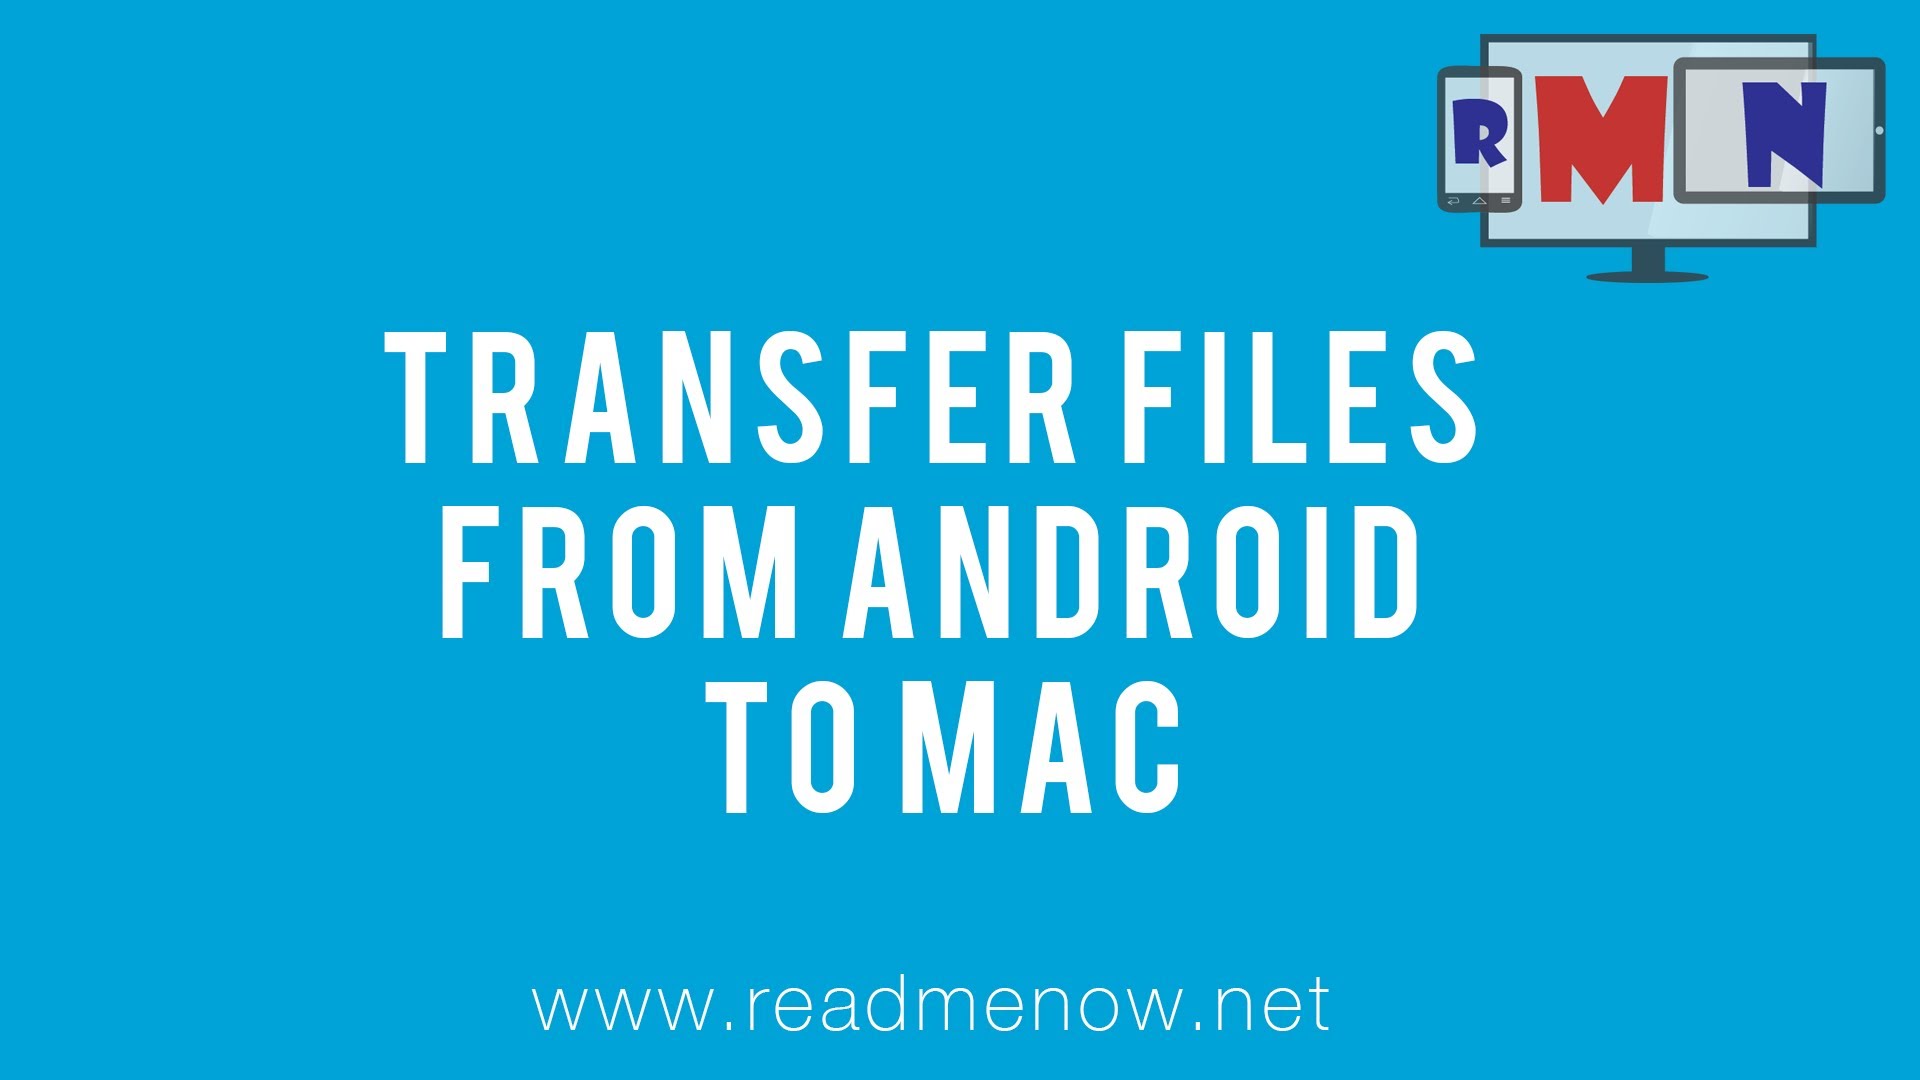 Transfer files between Android and Mac OS